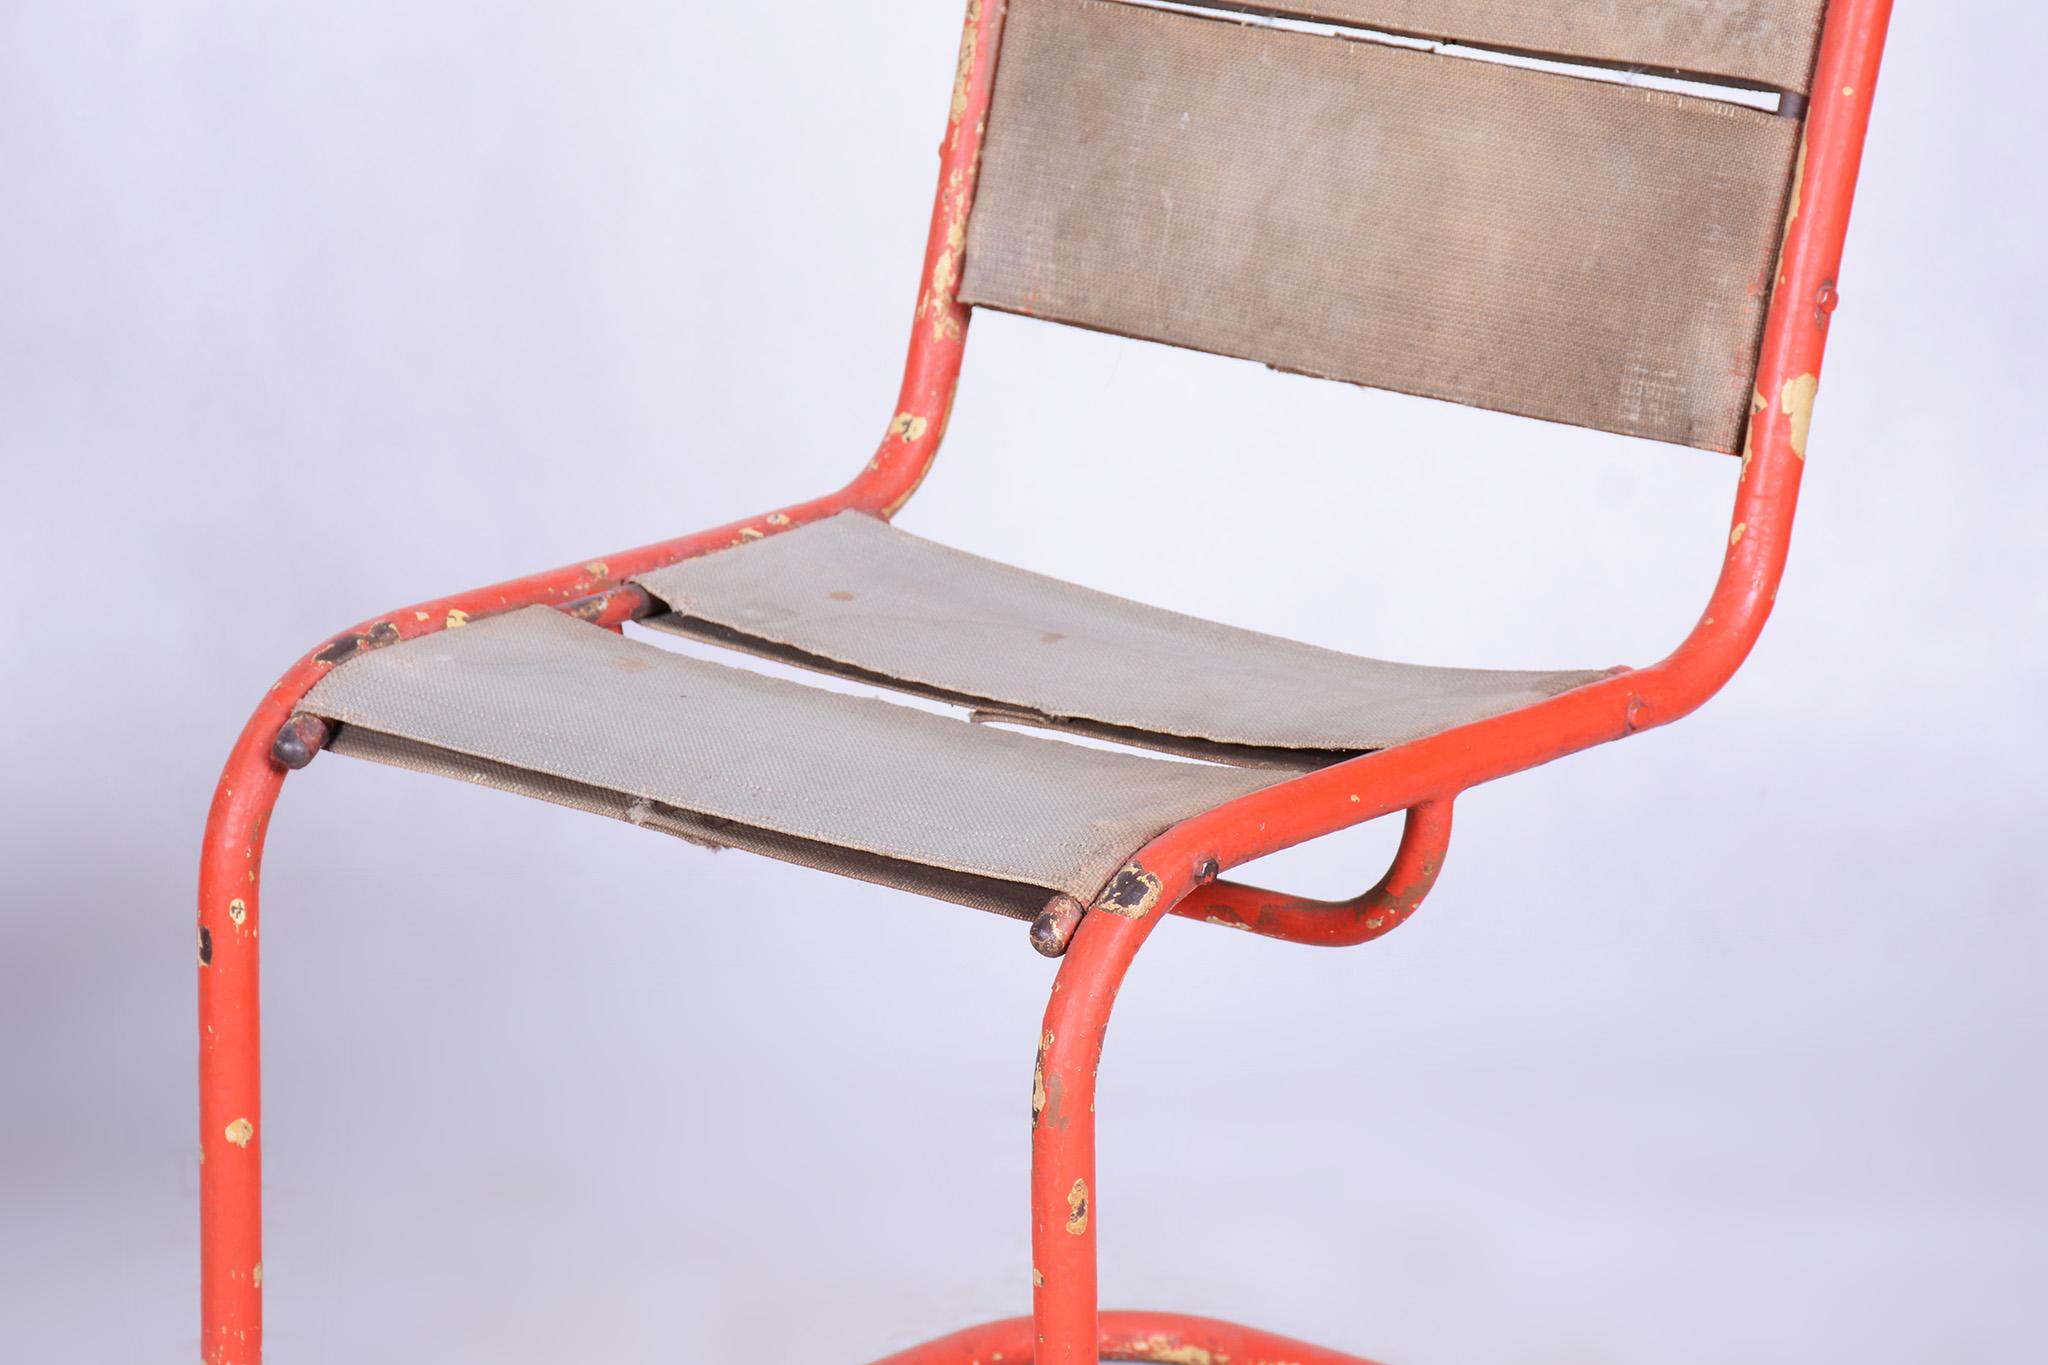 Original Pair of Chairs by Josef Gocar, Lacquered Steel, Czechia, 1930s For Sale 3